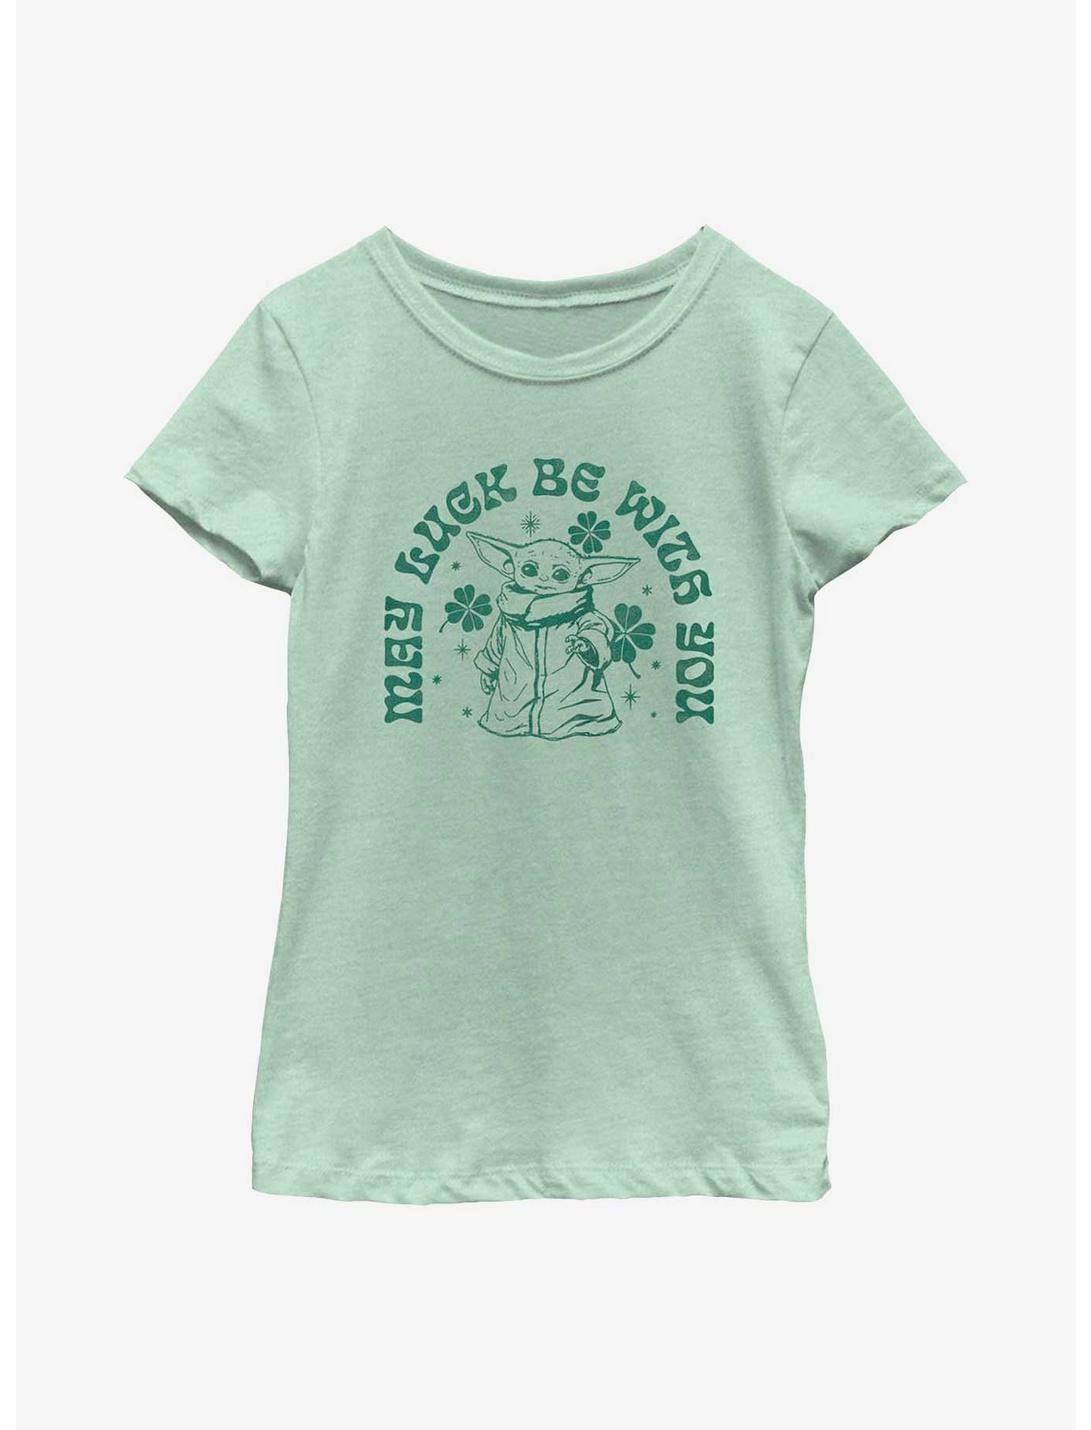 Star Wars The Mandalorian Grogu May Luck Be With You Youth Girls T-Shirt, MINT, hi-res